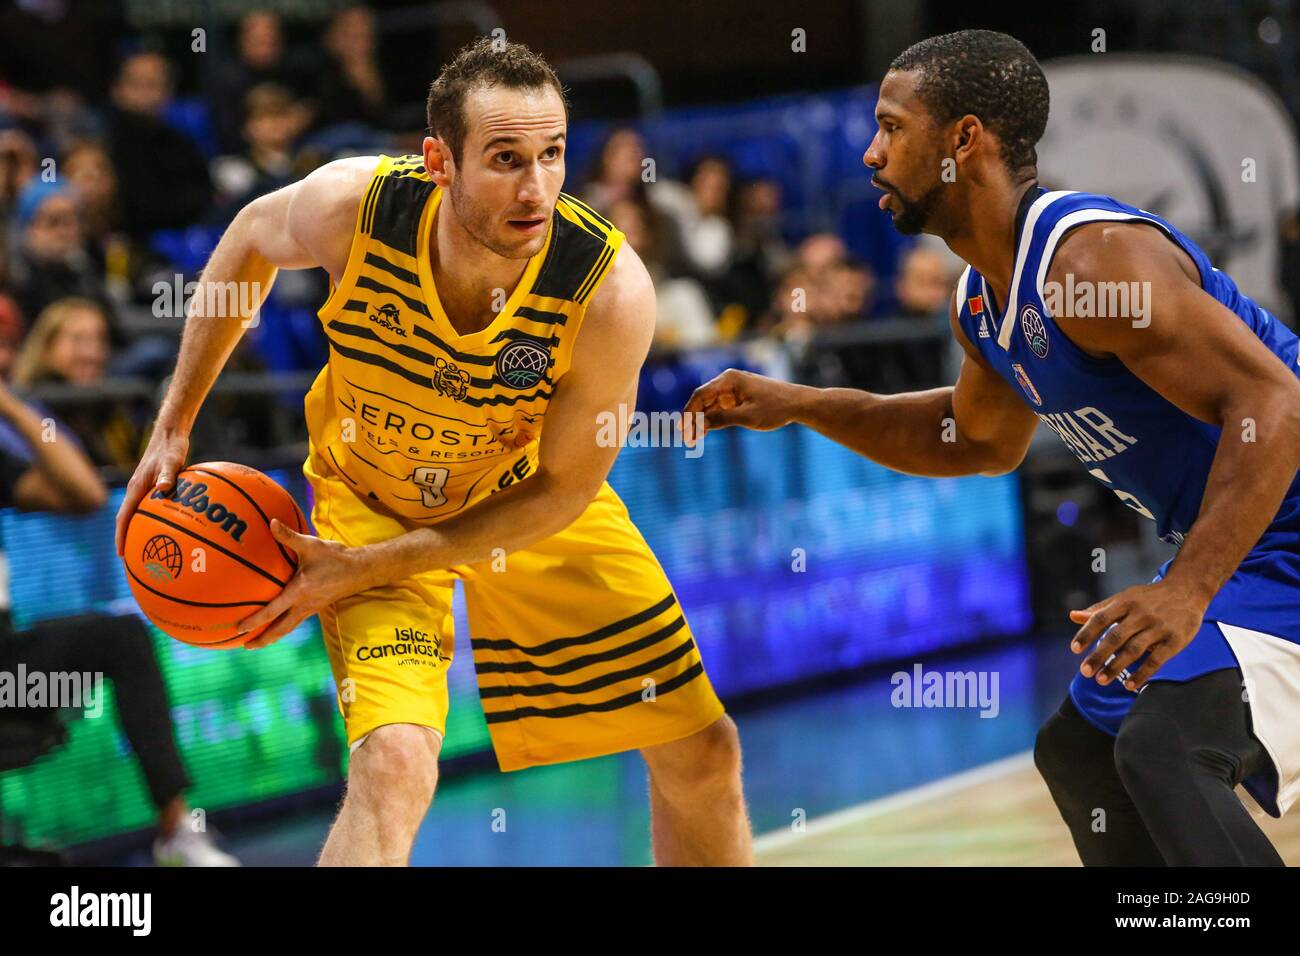 San Cristobal Della Laguna, Spain. 17th Dec, 2019. For the team of Vidorreta comes the eighth victory in the continental event in front of a special guest, the CT of the Brazilian national team, Aleksandar Petrovic. Ibèrostar Tenerife - KK Mornar Bar 91-61 (Photo by Davide Di Lalla/Pacific Press) Credit: Pacific Press Agency/Alamy Live News Stock Photo